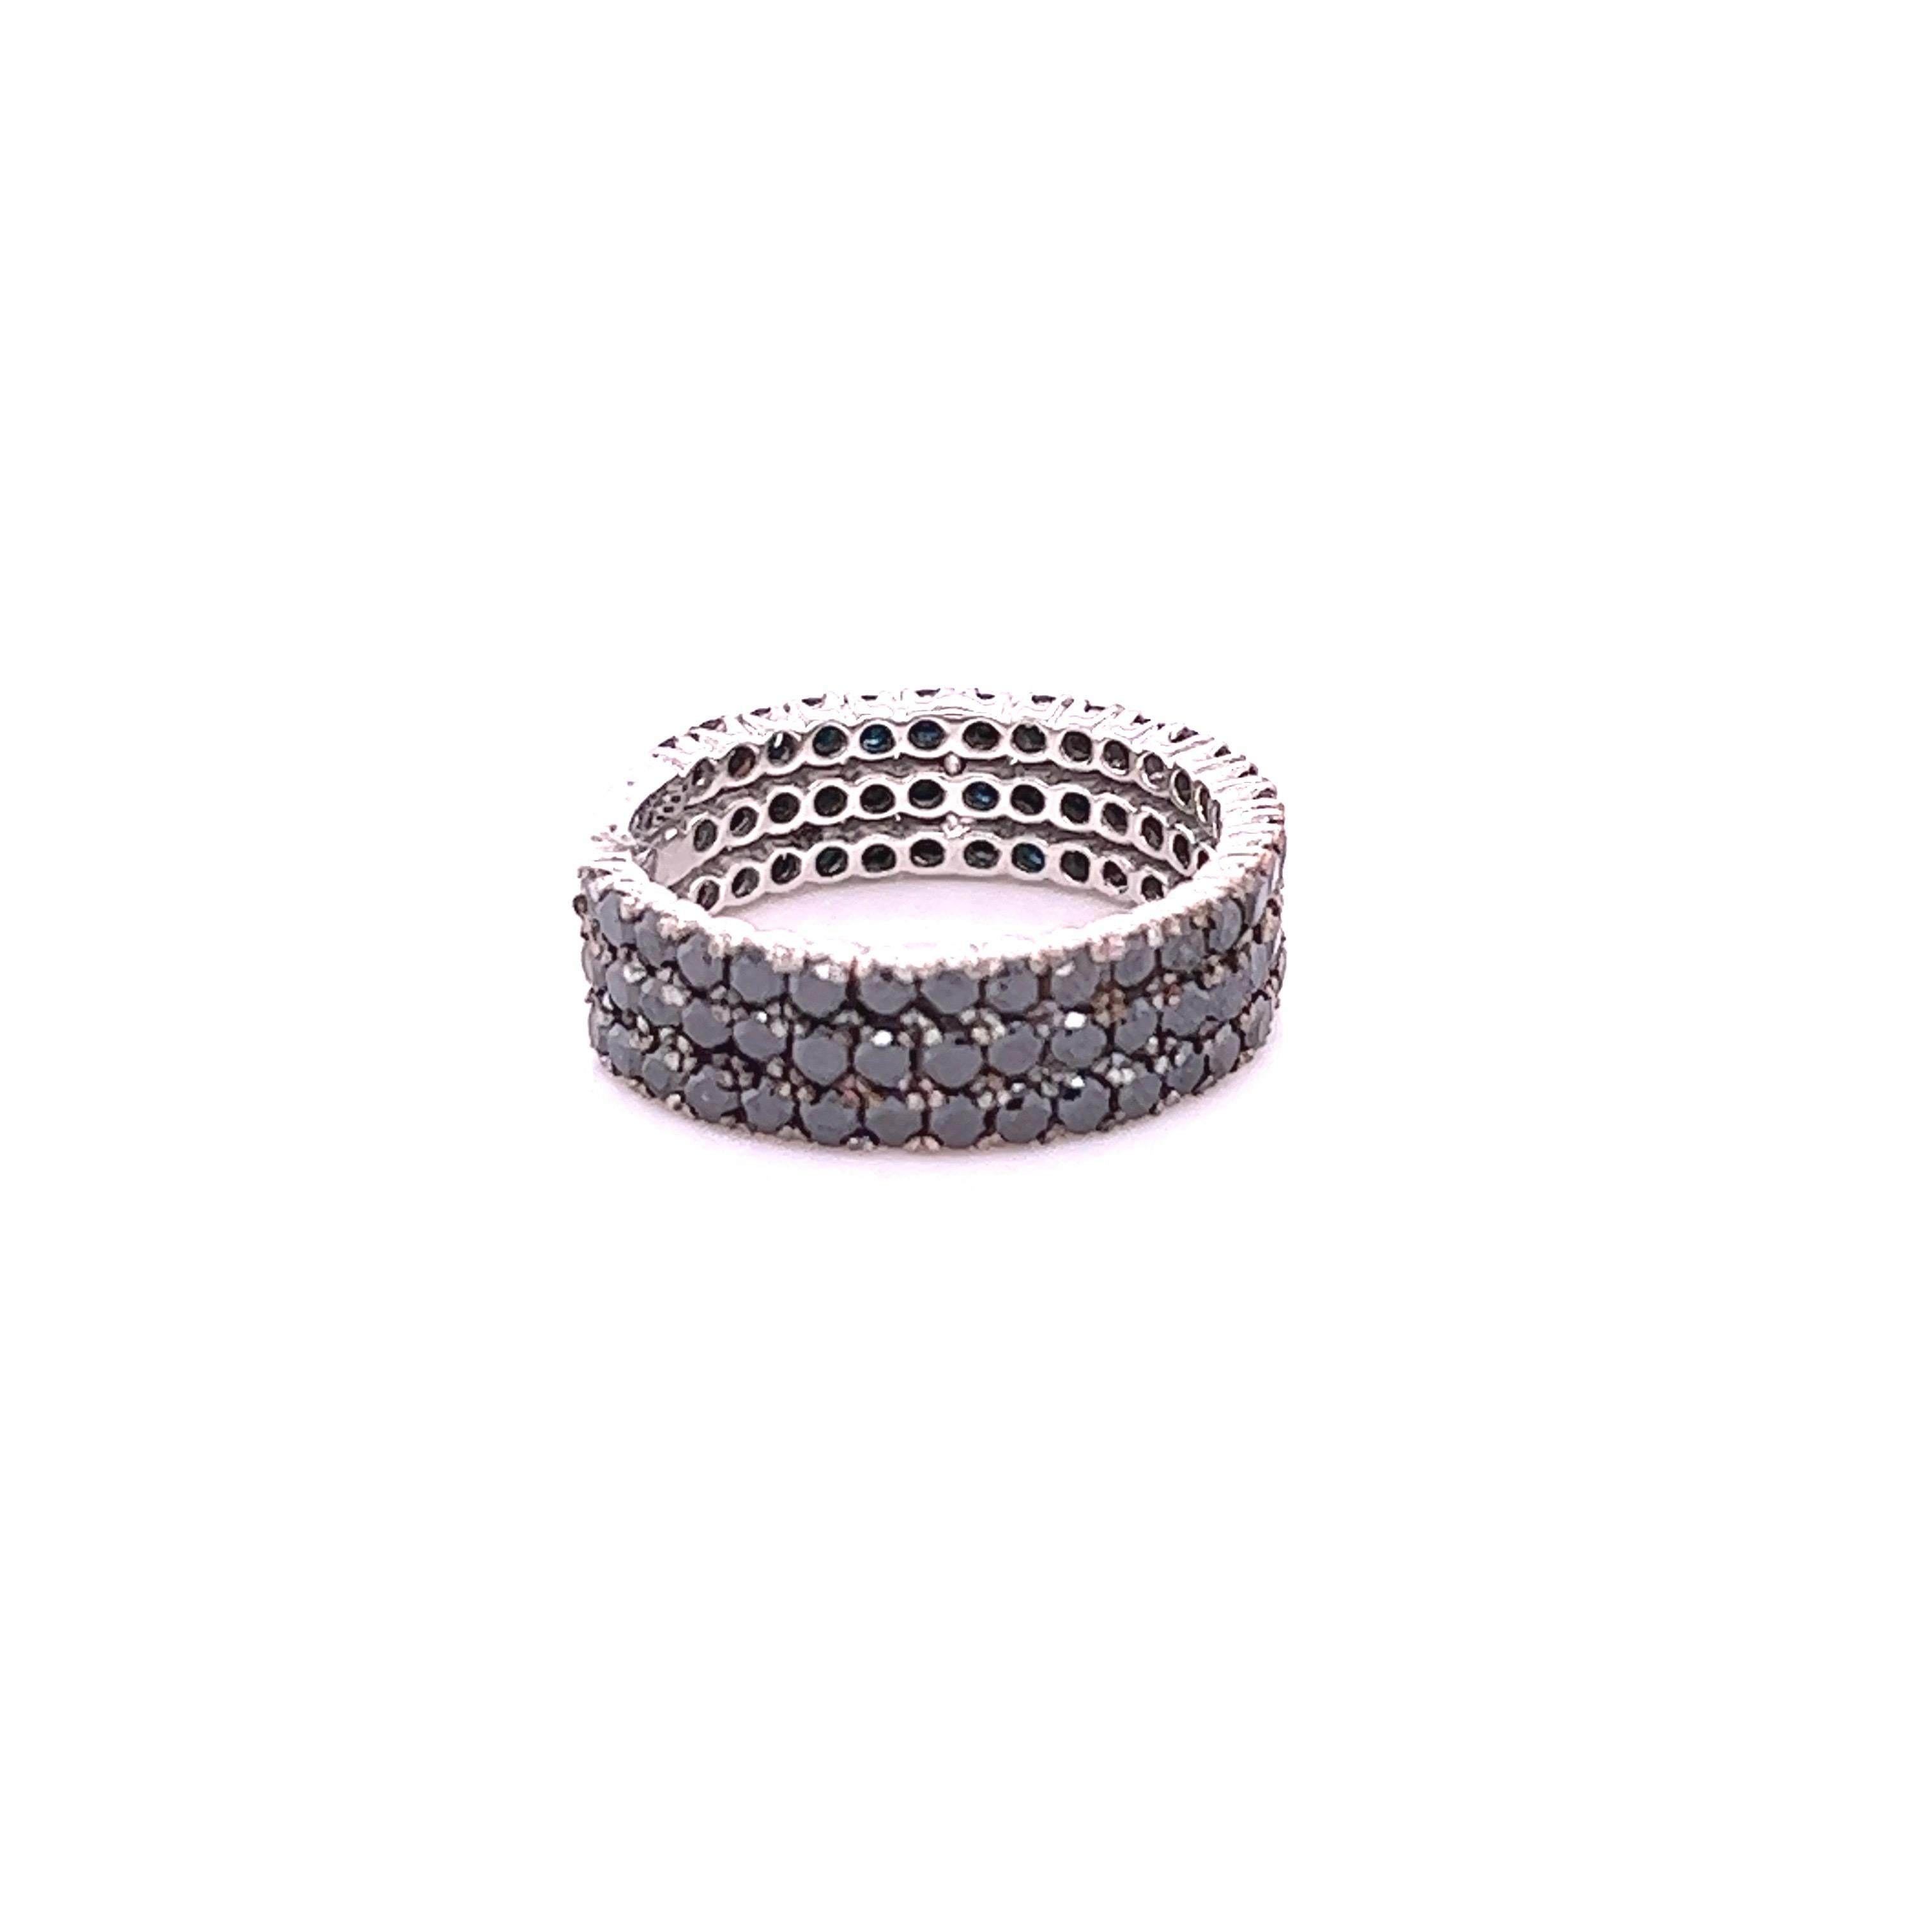 This ring has 98 Natural Round Cut Black Diamonds that weigh 2.16 carats. 
The black diamonds are natural and are color treated to attain its black color. 

It is set in 14 Karat White Gold and has a weight of approximately 4.0 grams. 
The width of